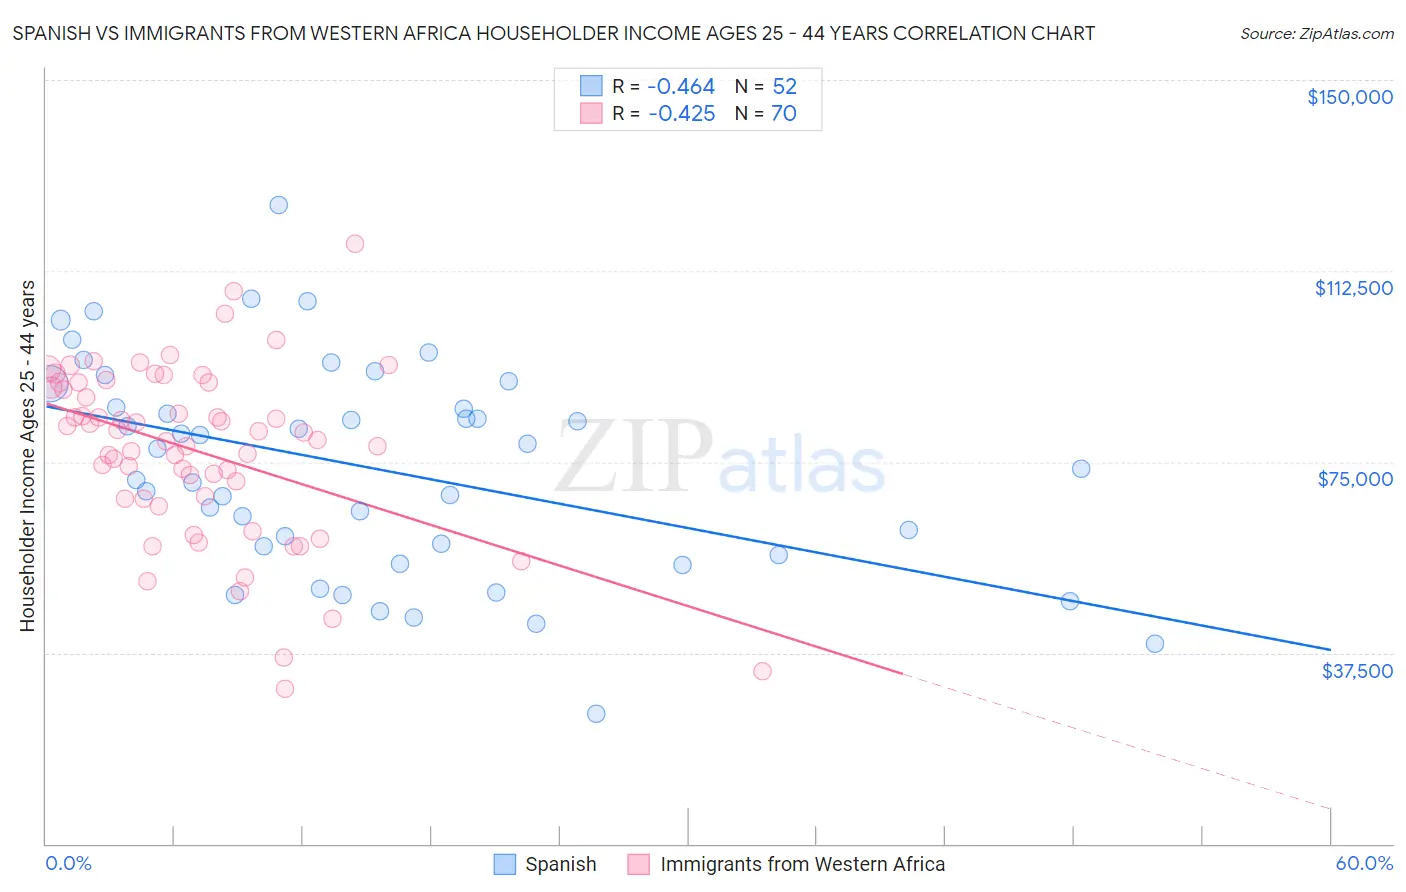 Spanish vs Immigrants from Western Africa Householder Income Ages 25 - 44 years